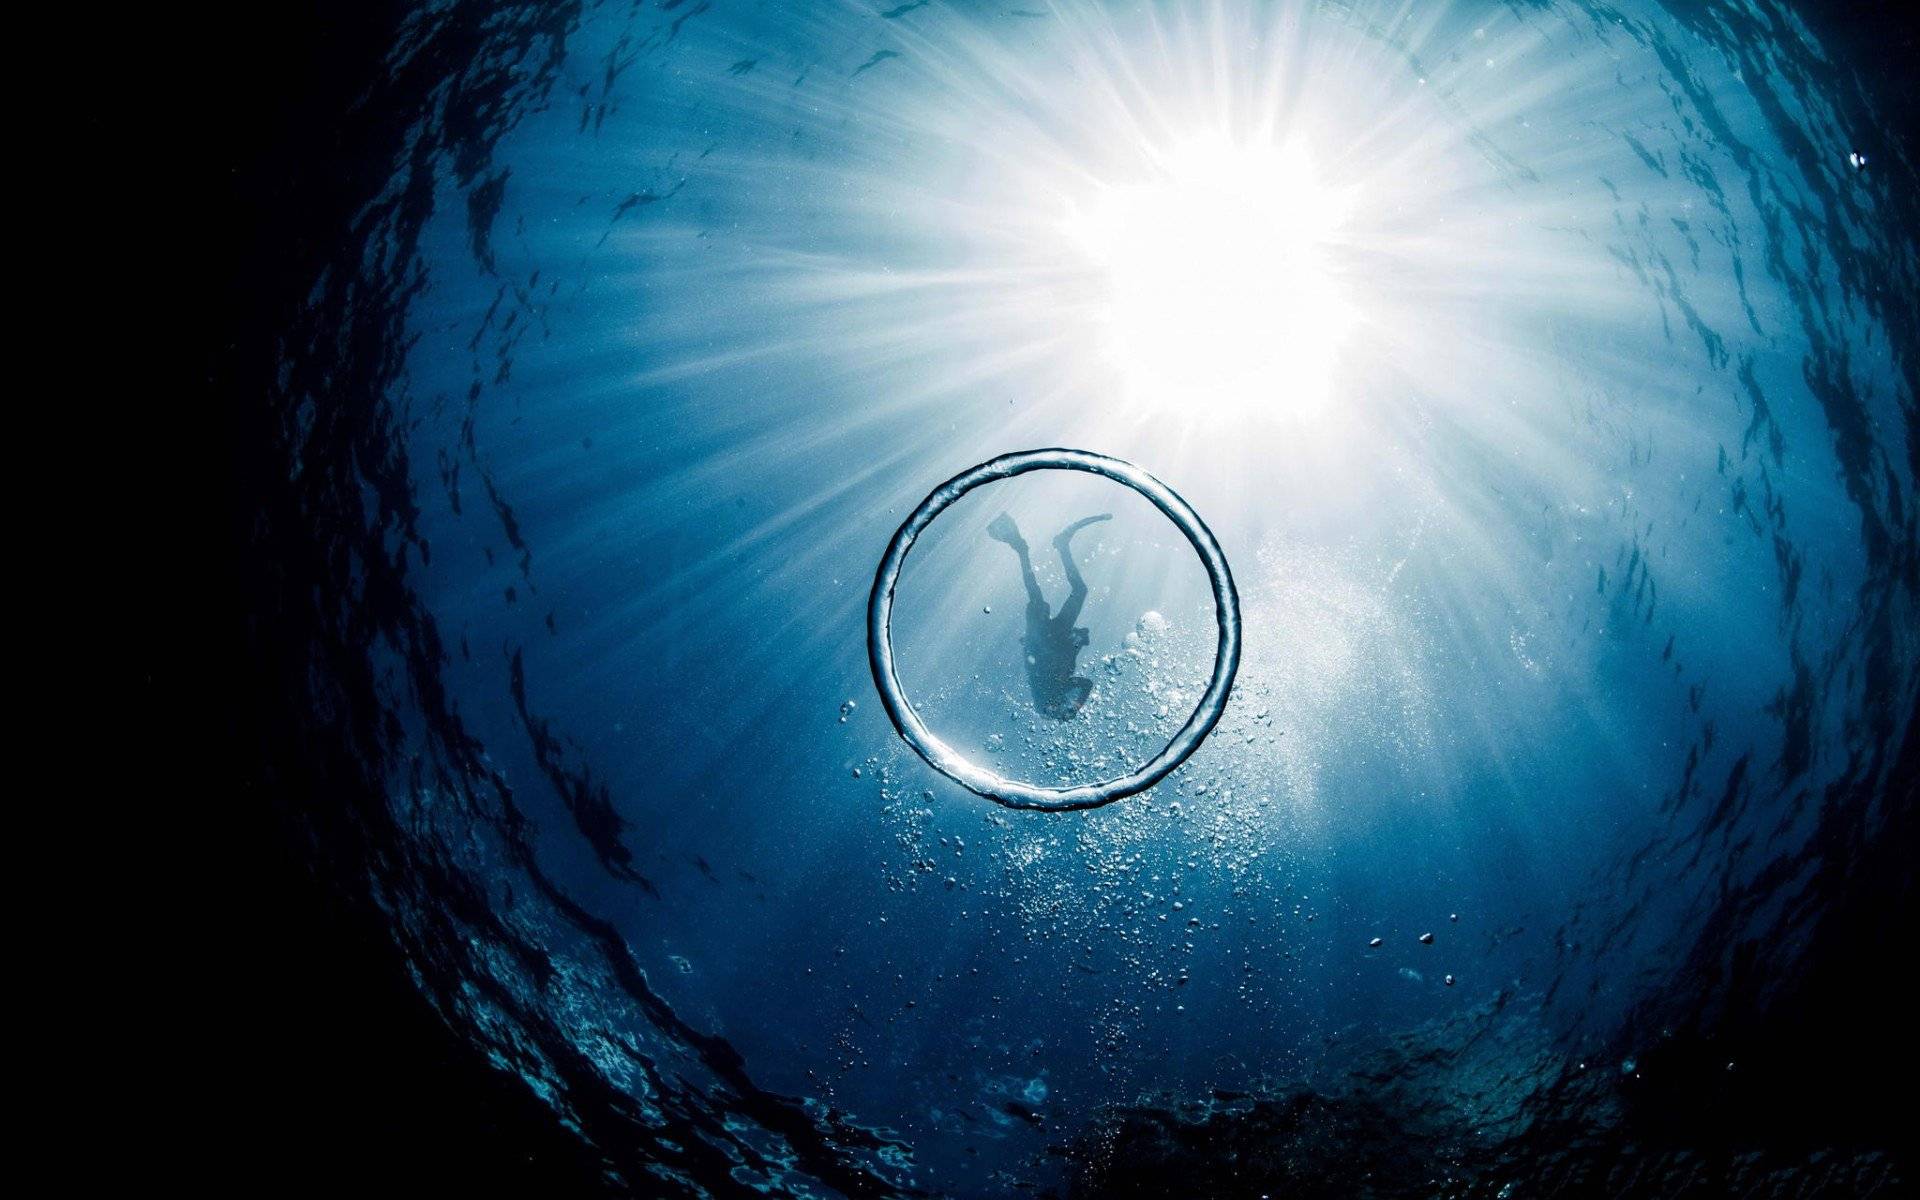 Wallpapers diving scuba diver ascent from the depth on the desktop